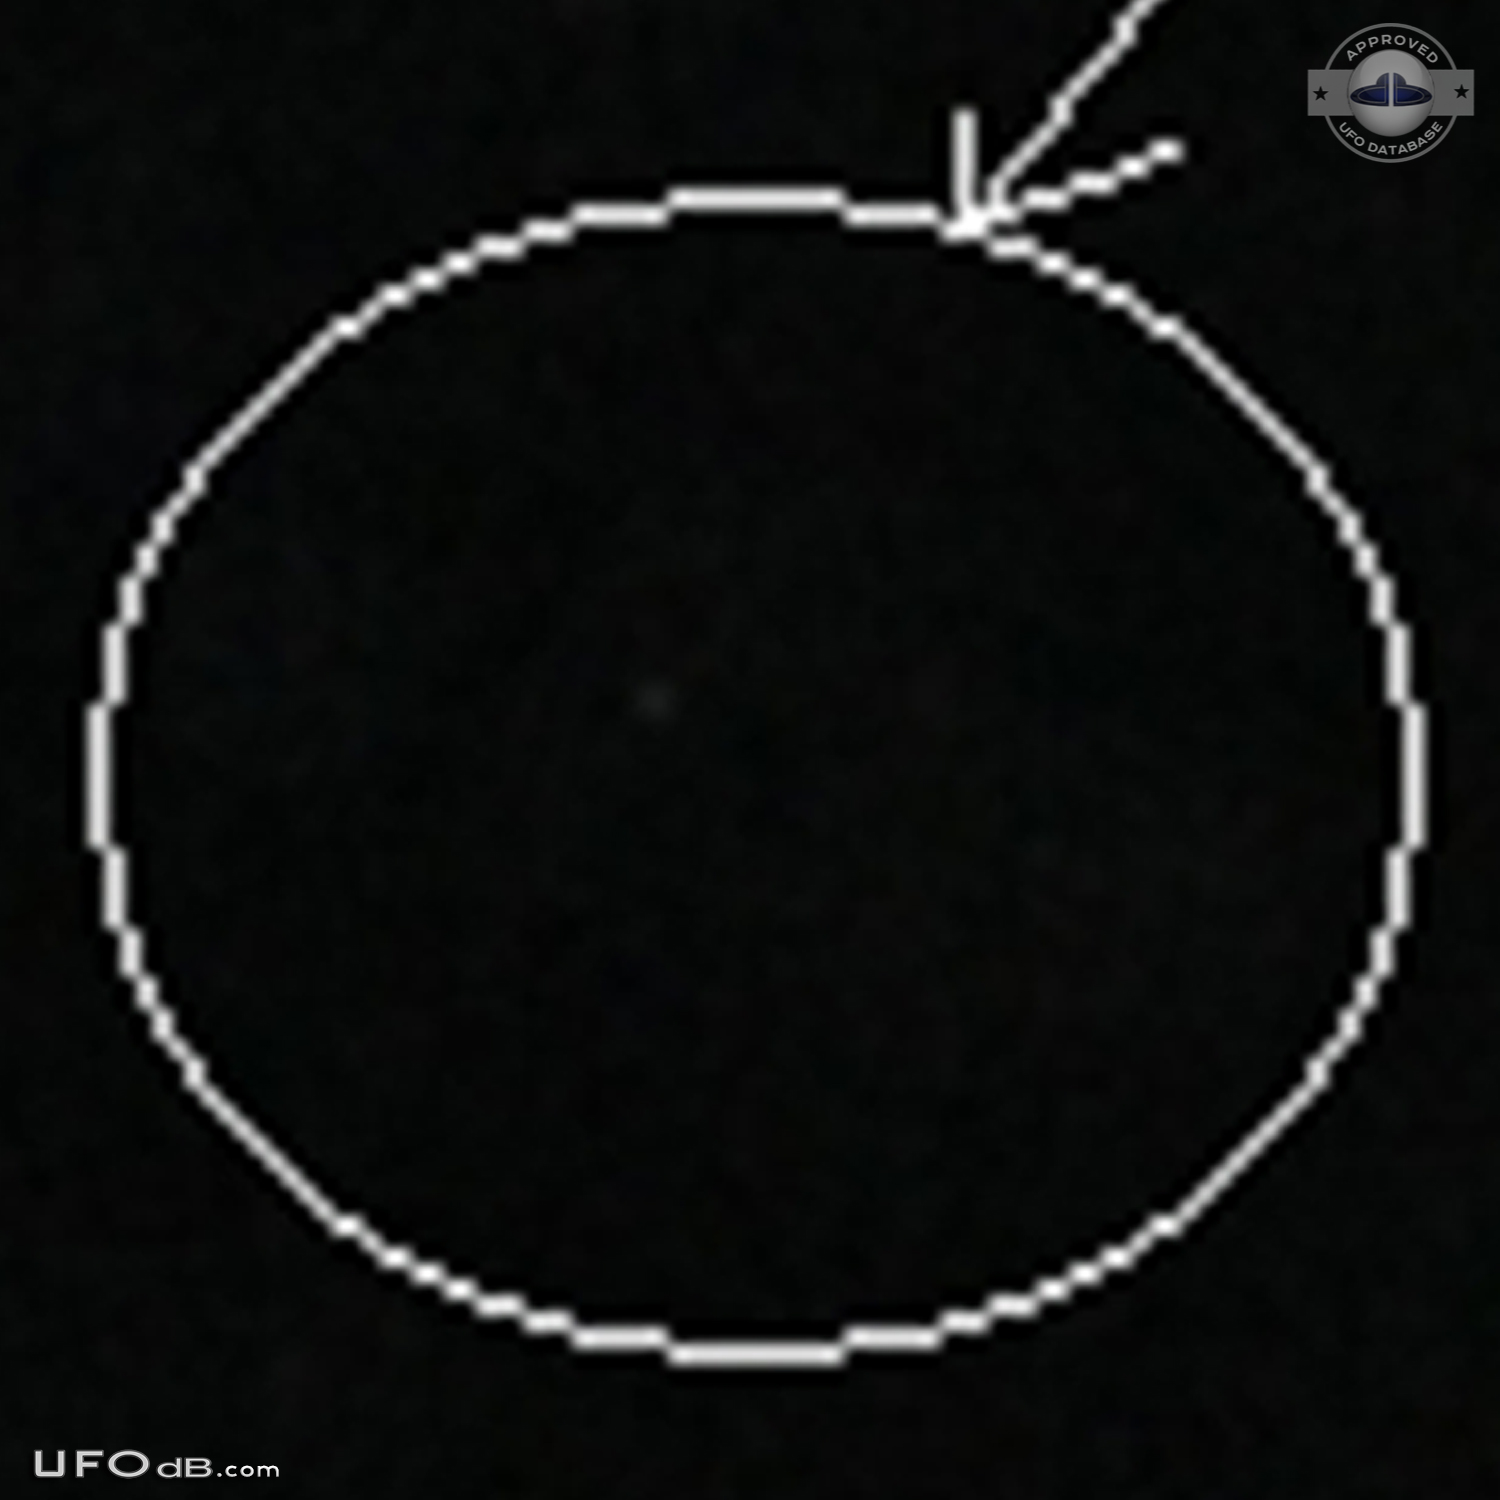 UFO over South sky in Gampaha Sri Lanka Changing Red,Blue,White lights UFO Picture #606-4